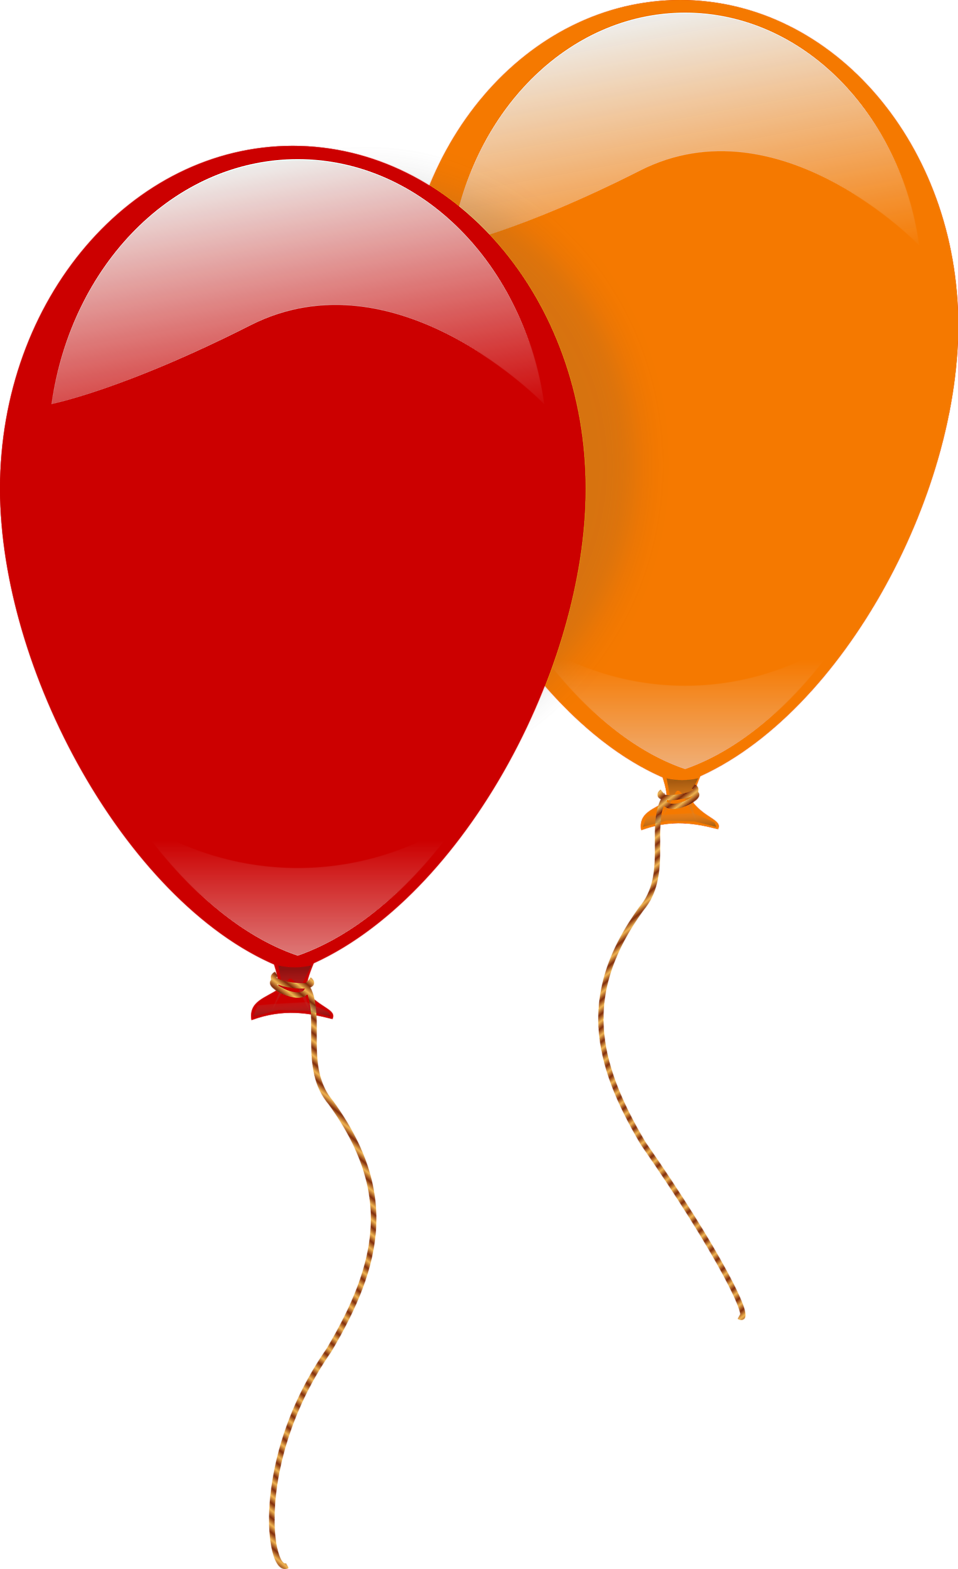 Balloons | Free Stock Photo | Illustration of a red and an orange 